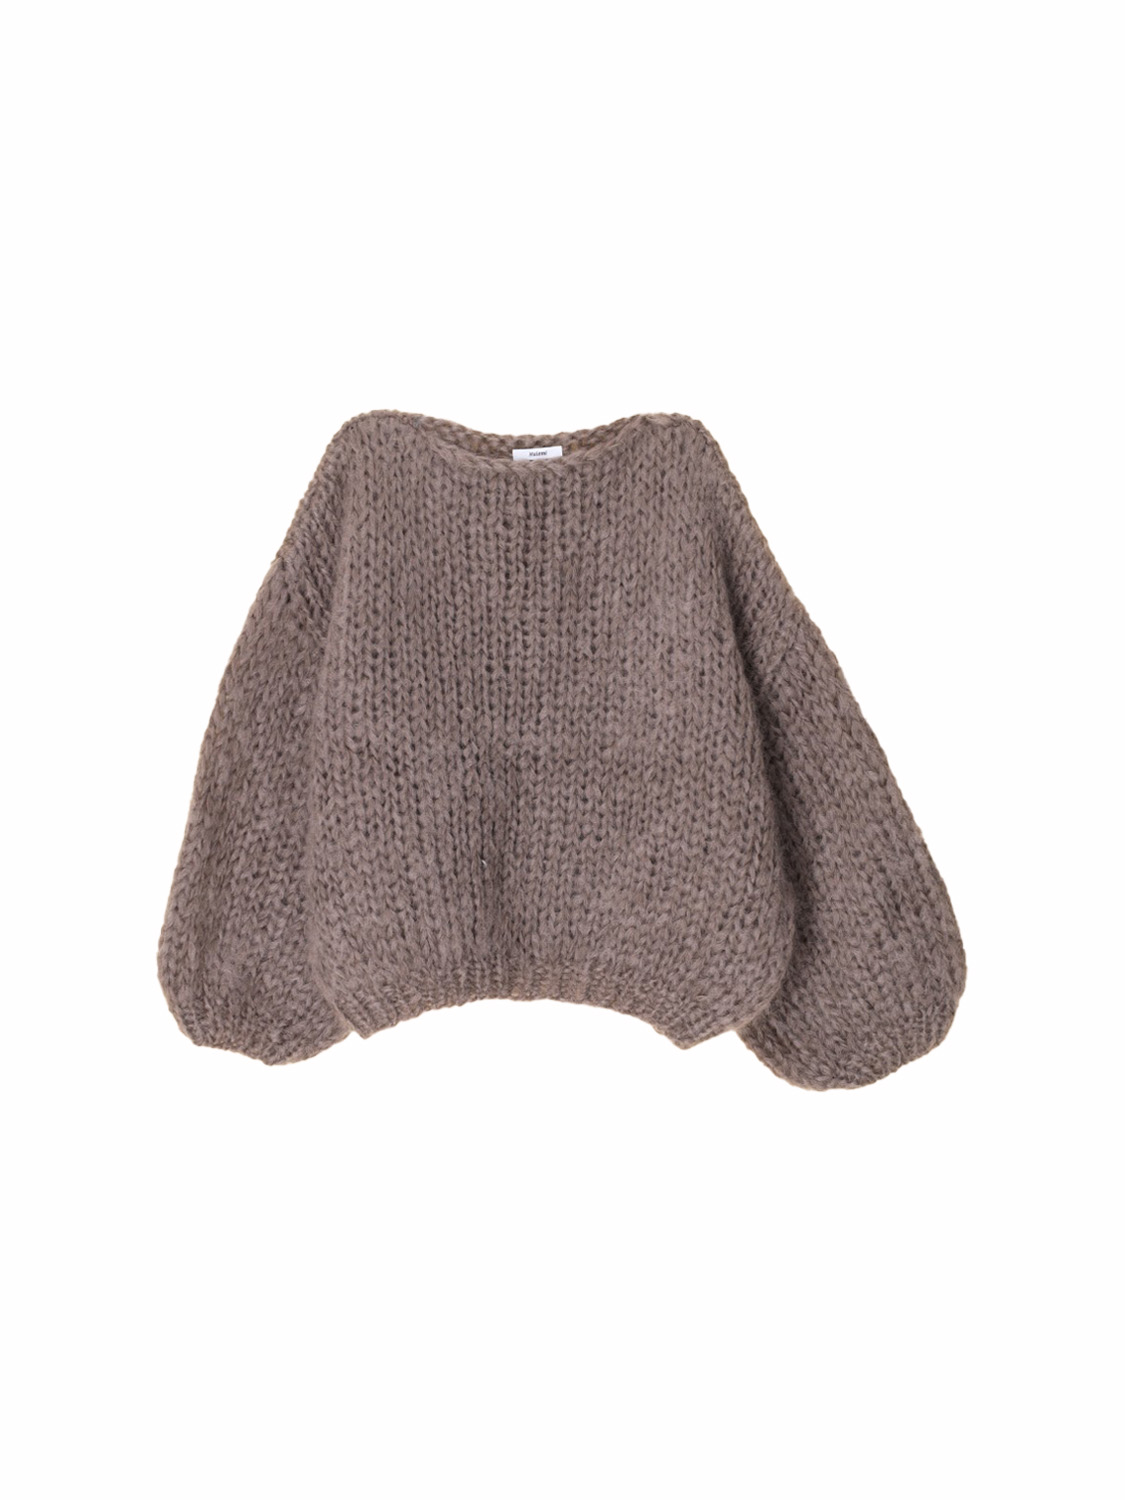 Mohair Big Sweater – Grobstrick Pullover